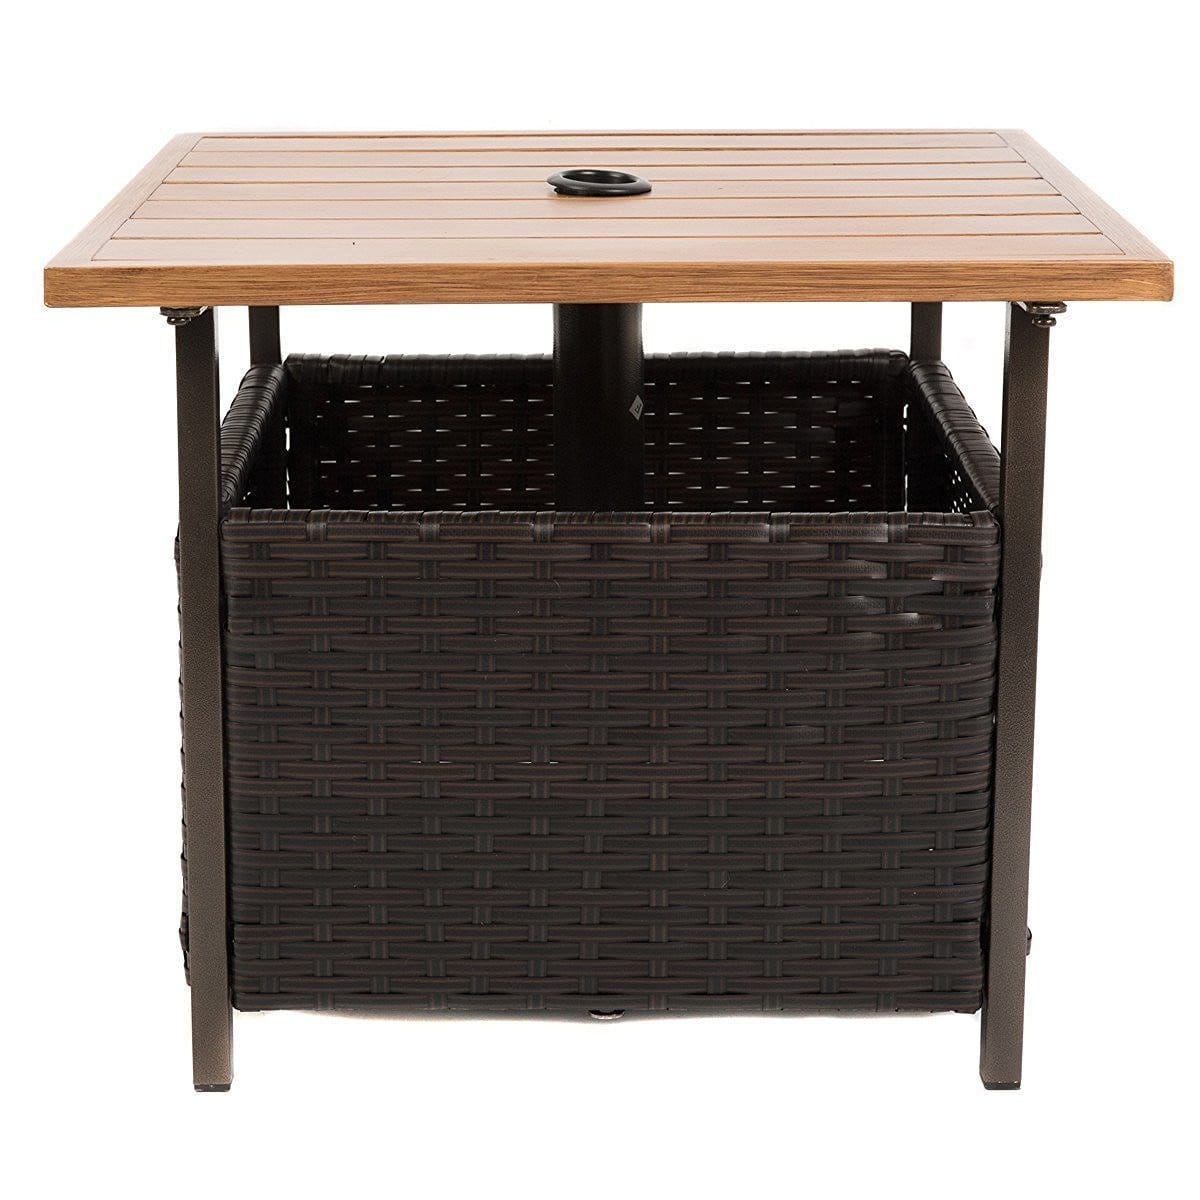 small wrought iron outdoor side table the perfect real end naturefun wicker square bistro with umbrella hole dining garden leisure coffee ottaman free shipping today living spaces